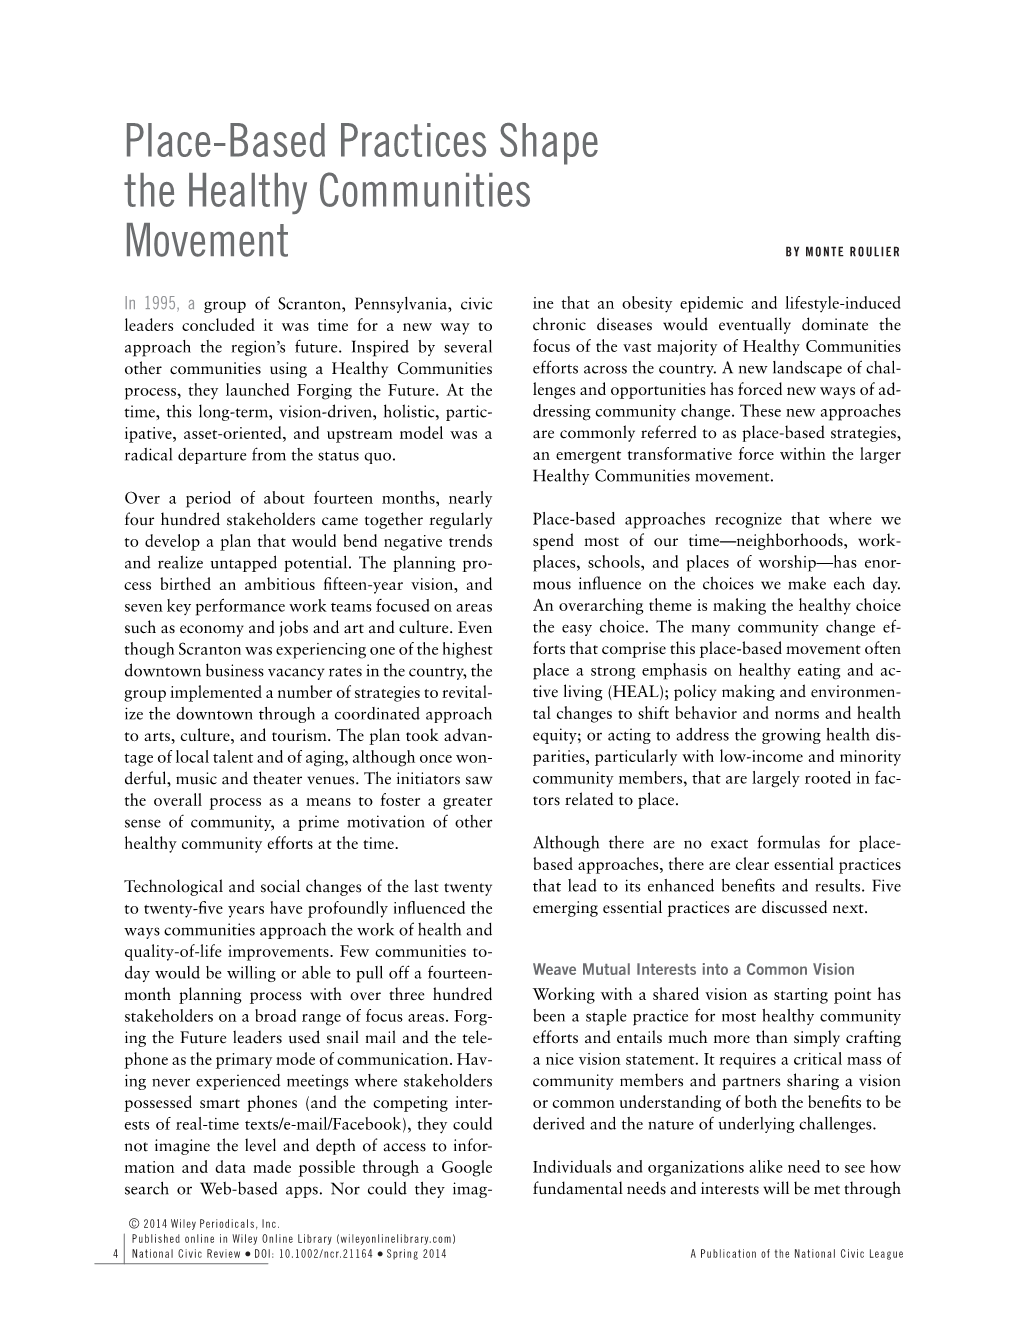 Place-Based Practices Shape the Healthy Communities Movement